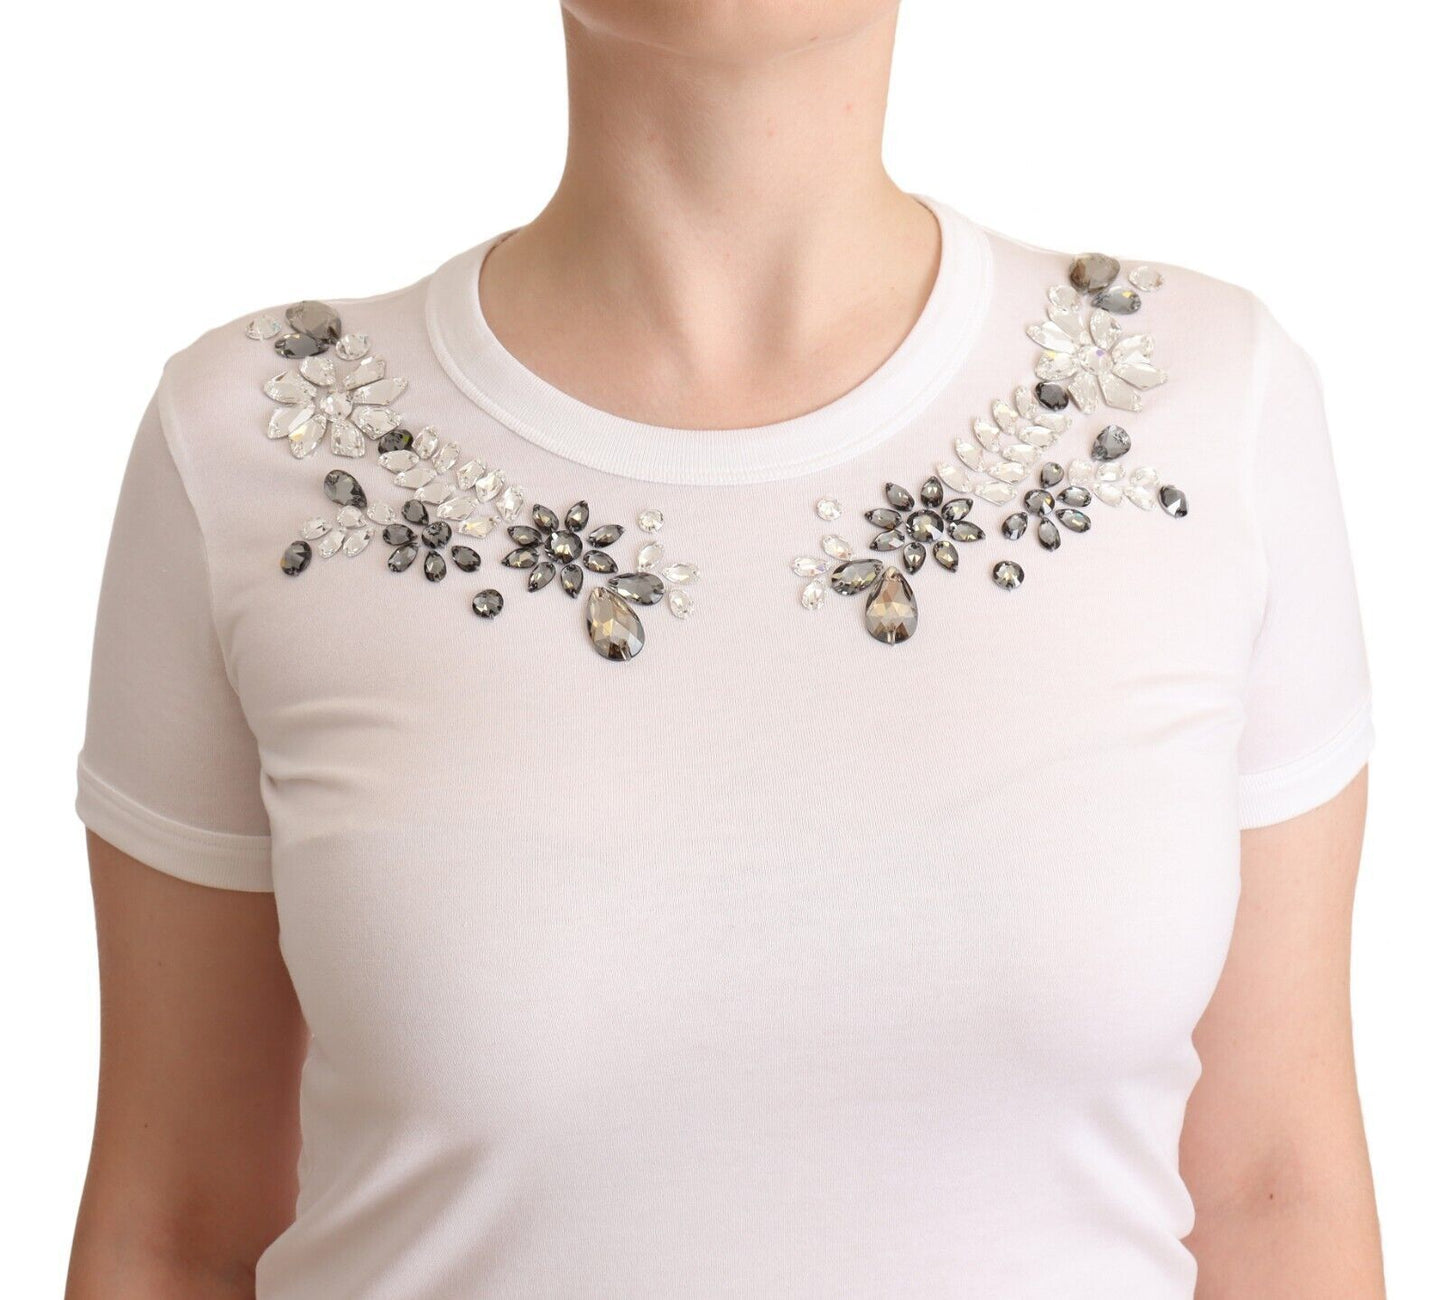 Crystal-Embellished White Cotton Tee